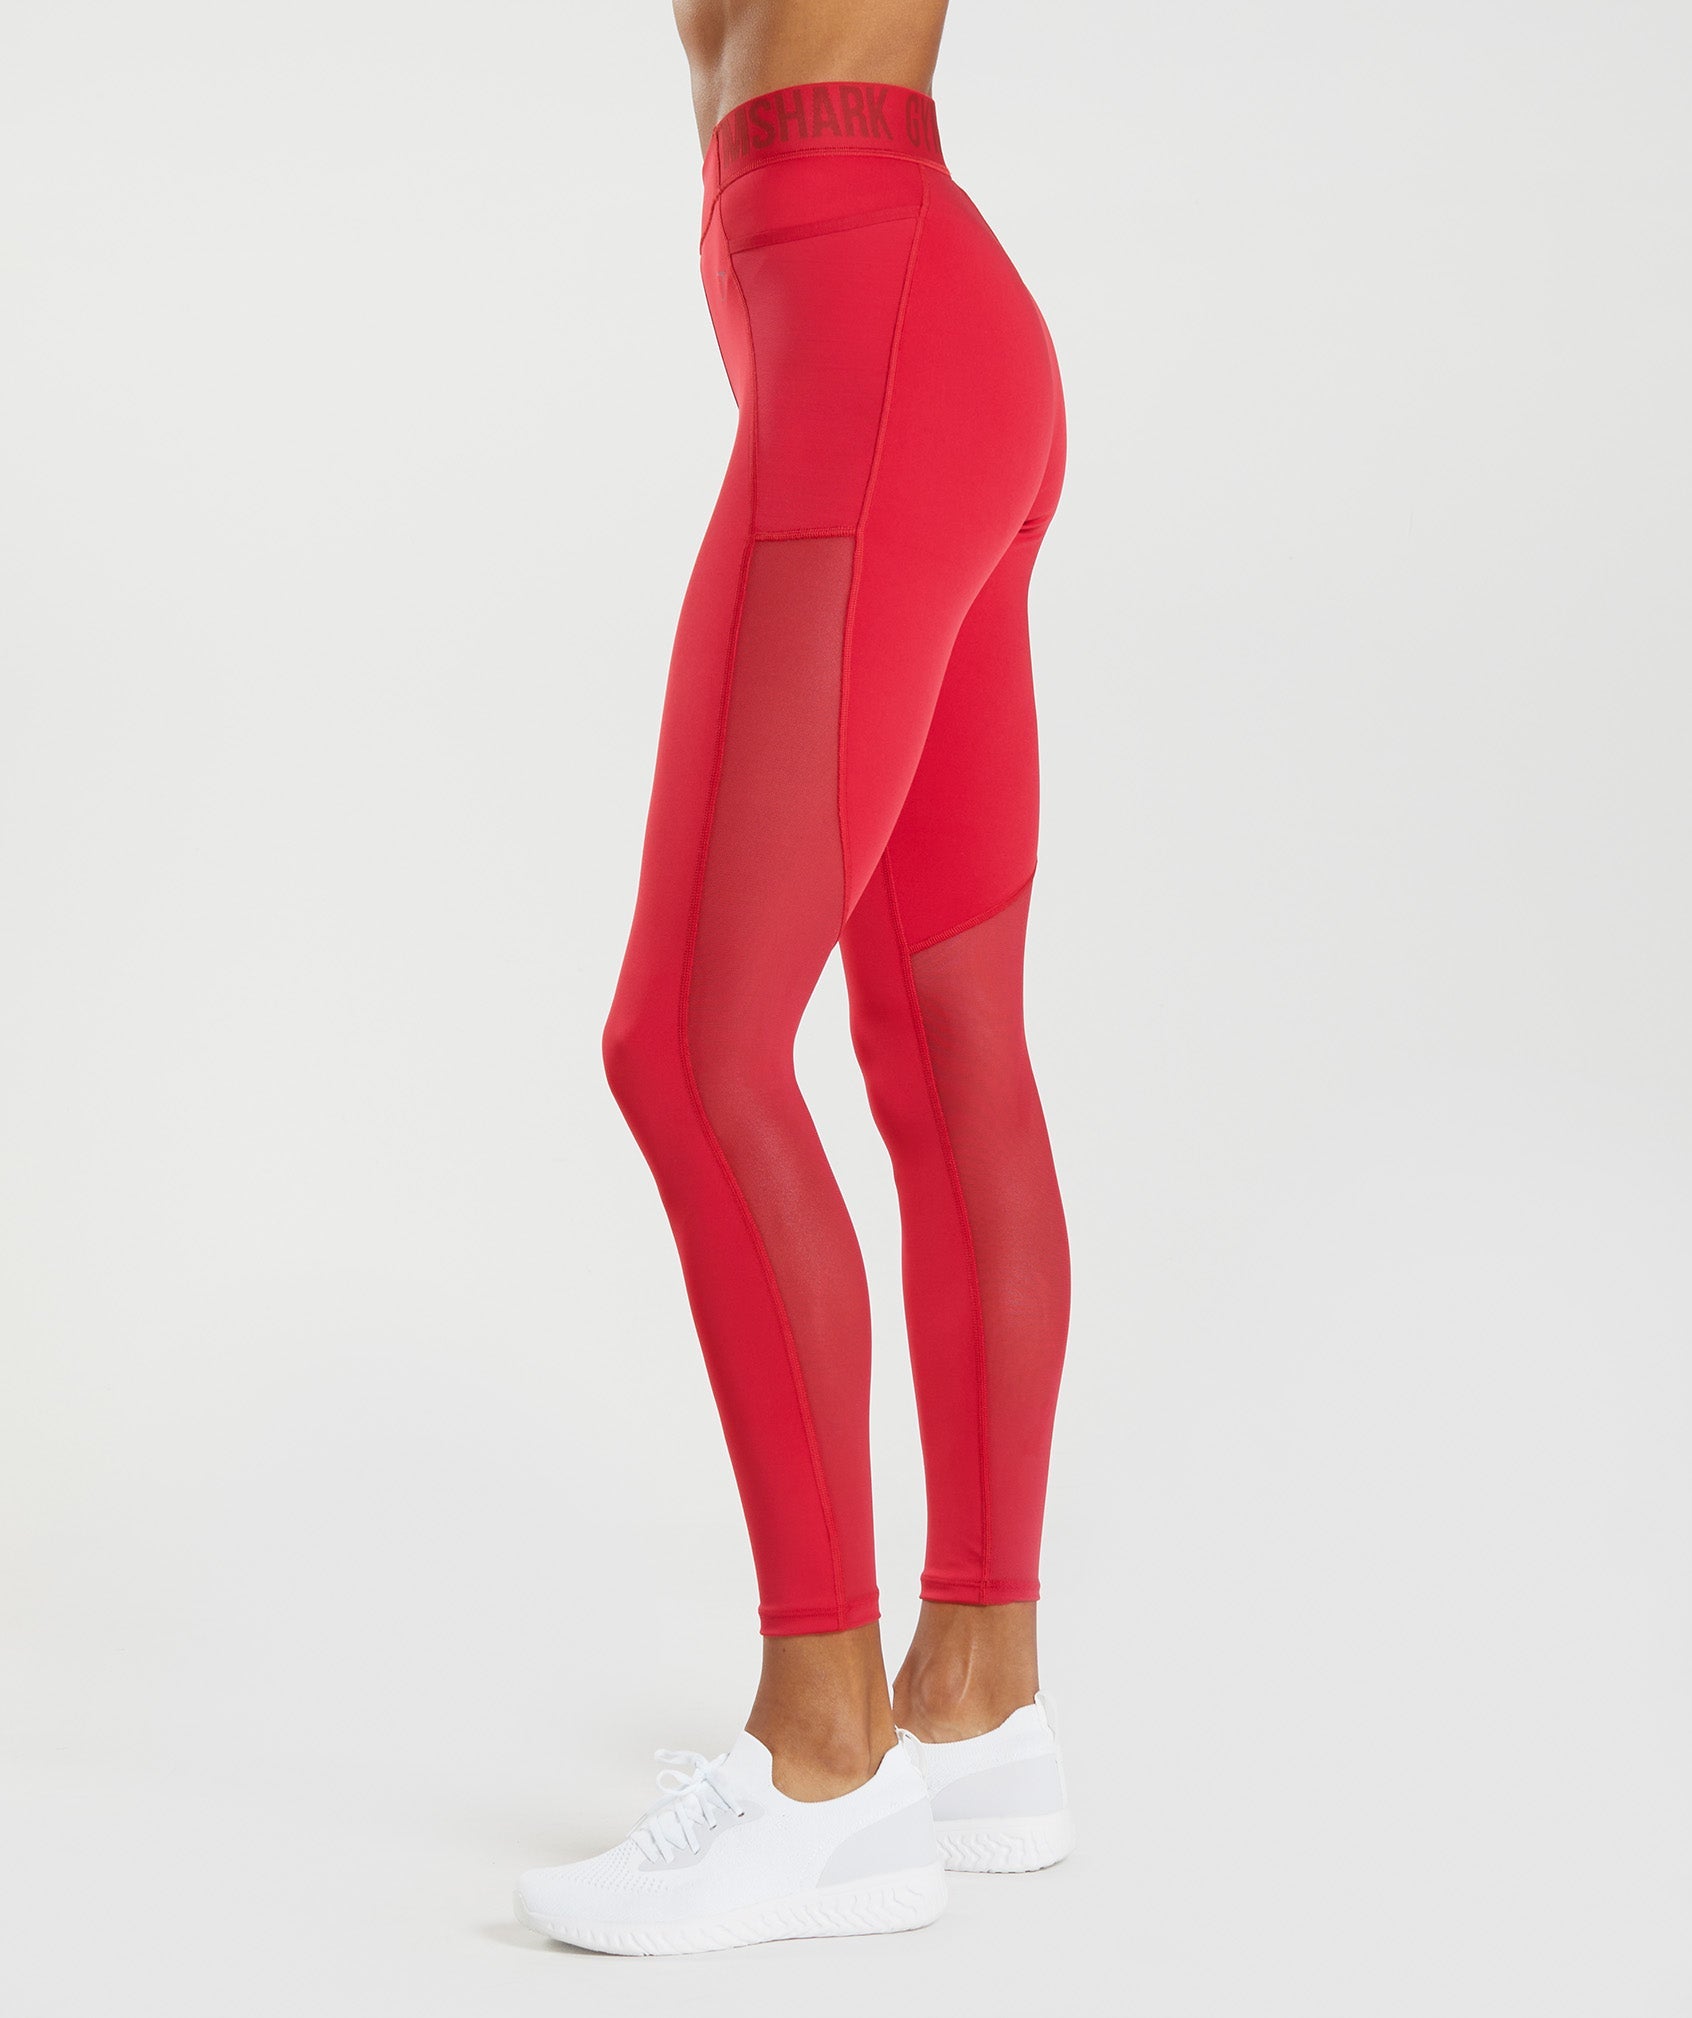 Gymshark Speed Leggings Red Size XS - $25 (50% Off Retail) - From